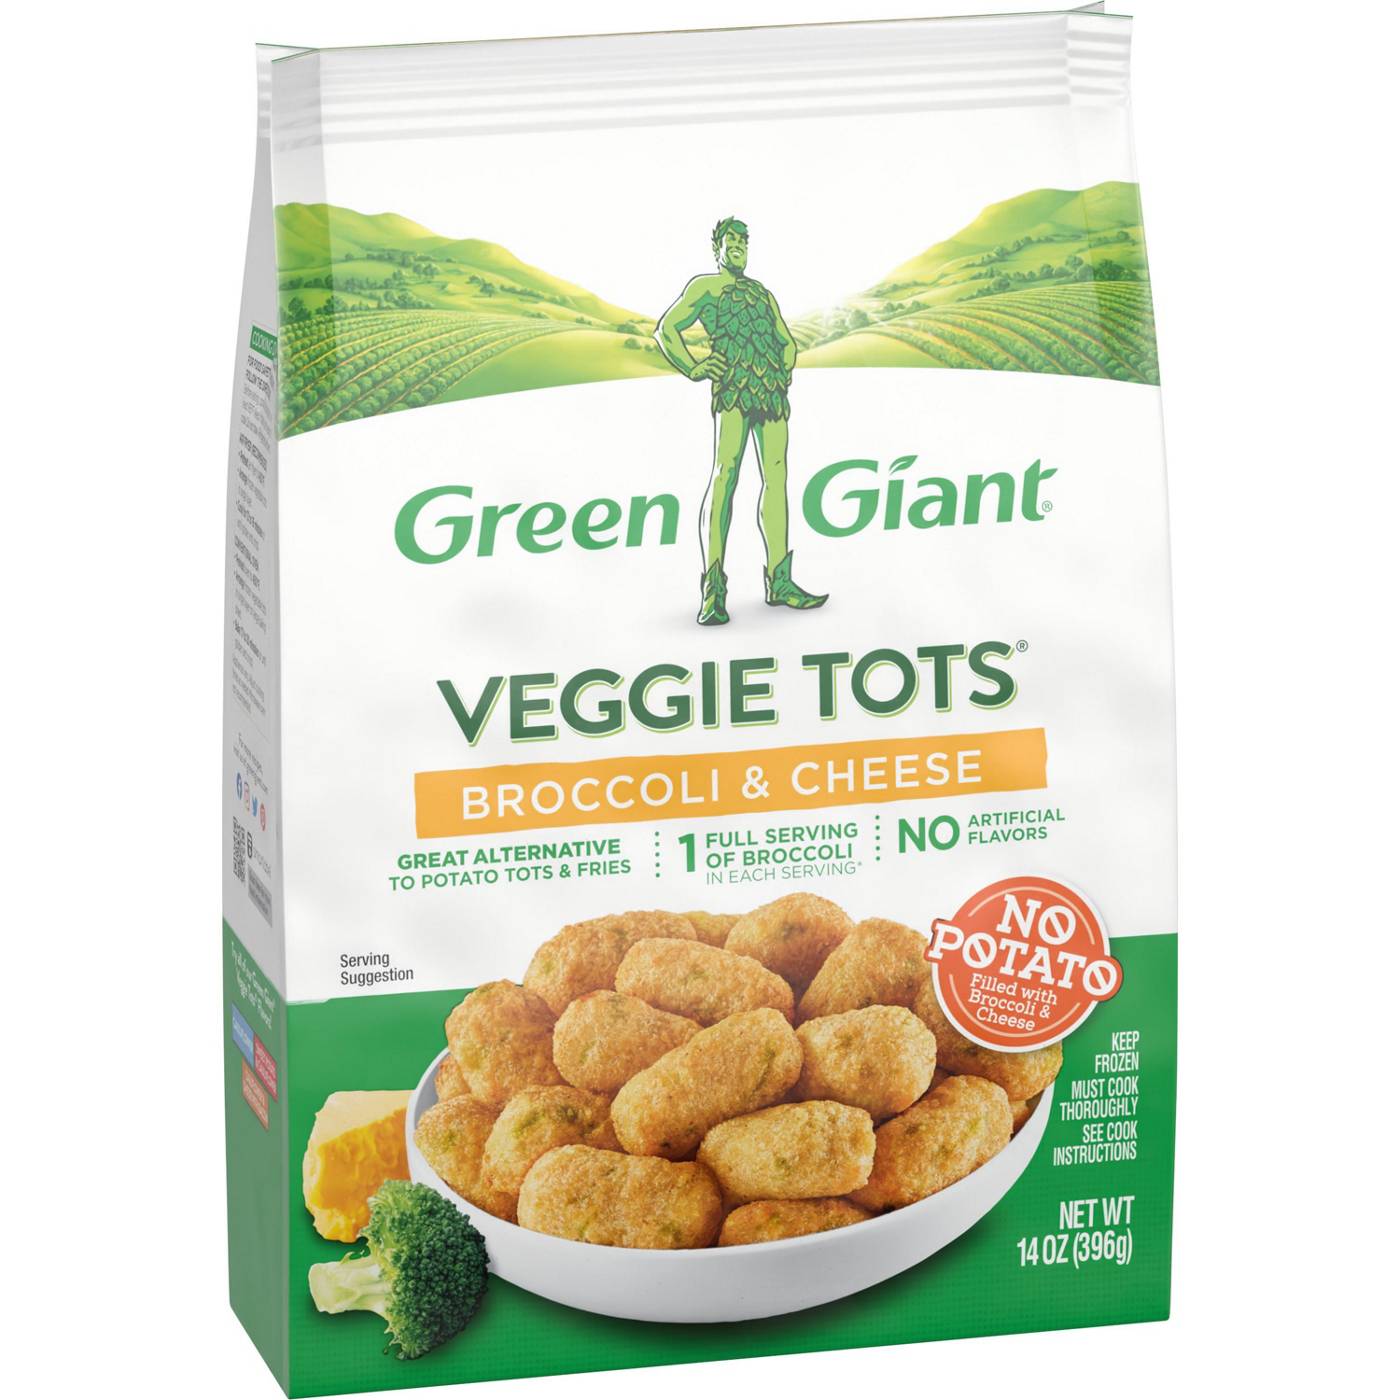 Green Giant Veggie Tots Broccoli & Cheese; image 2 of 3